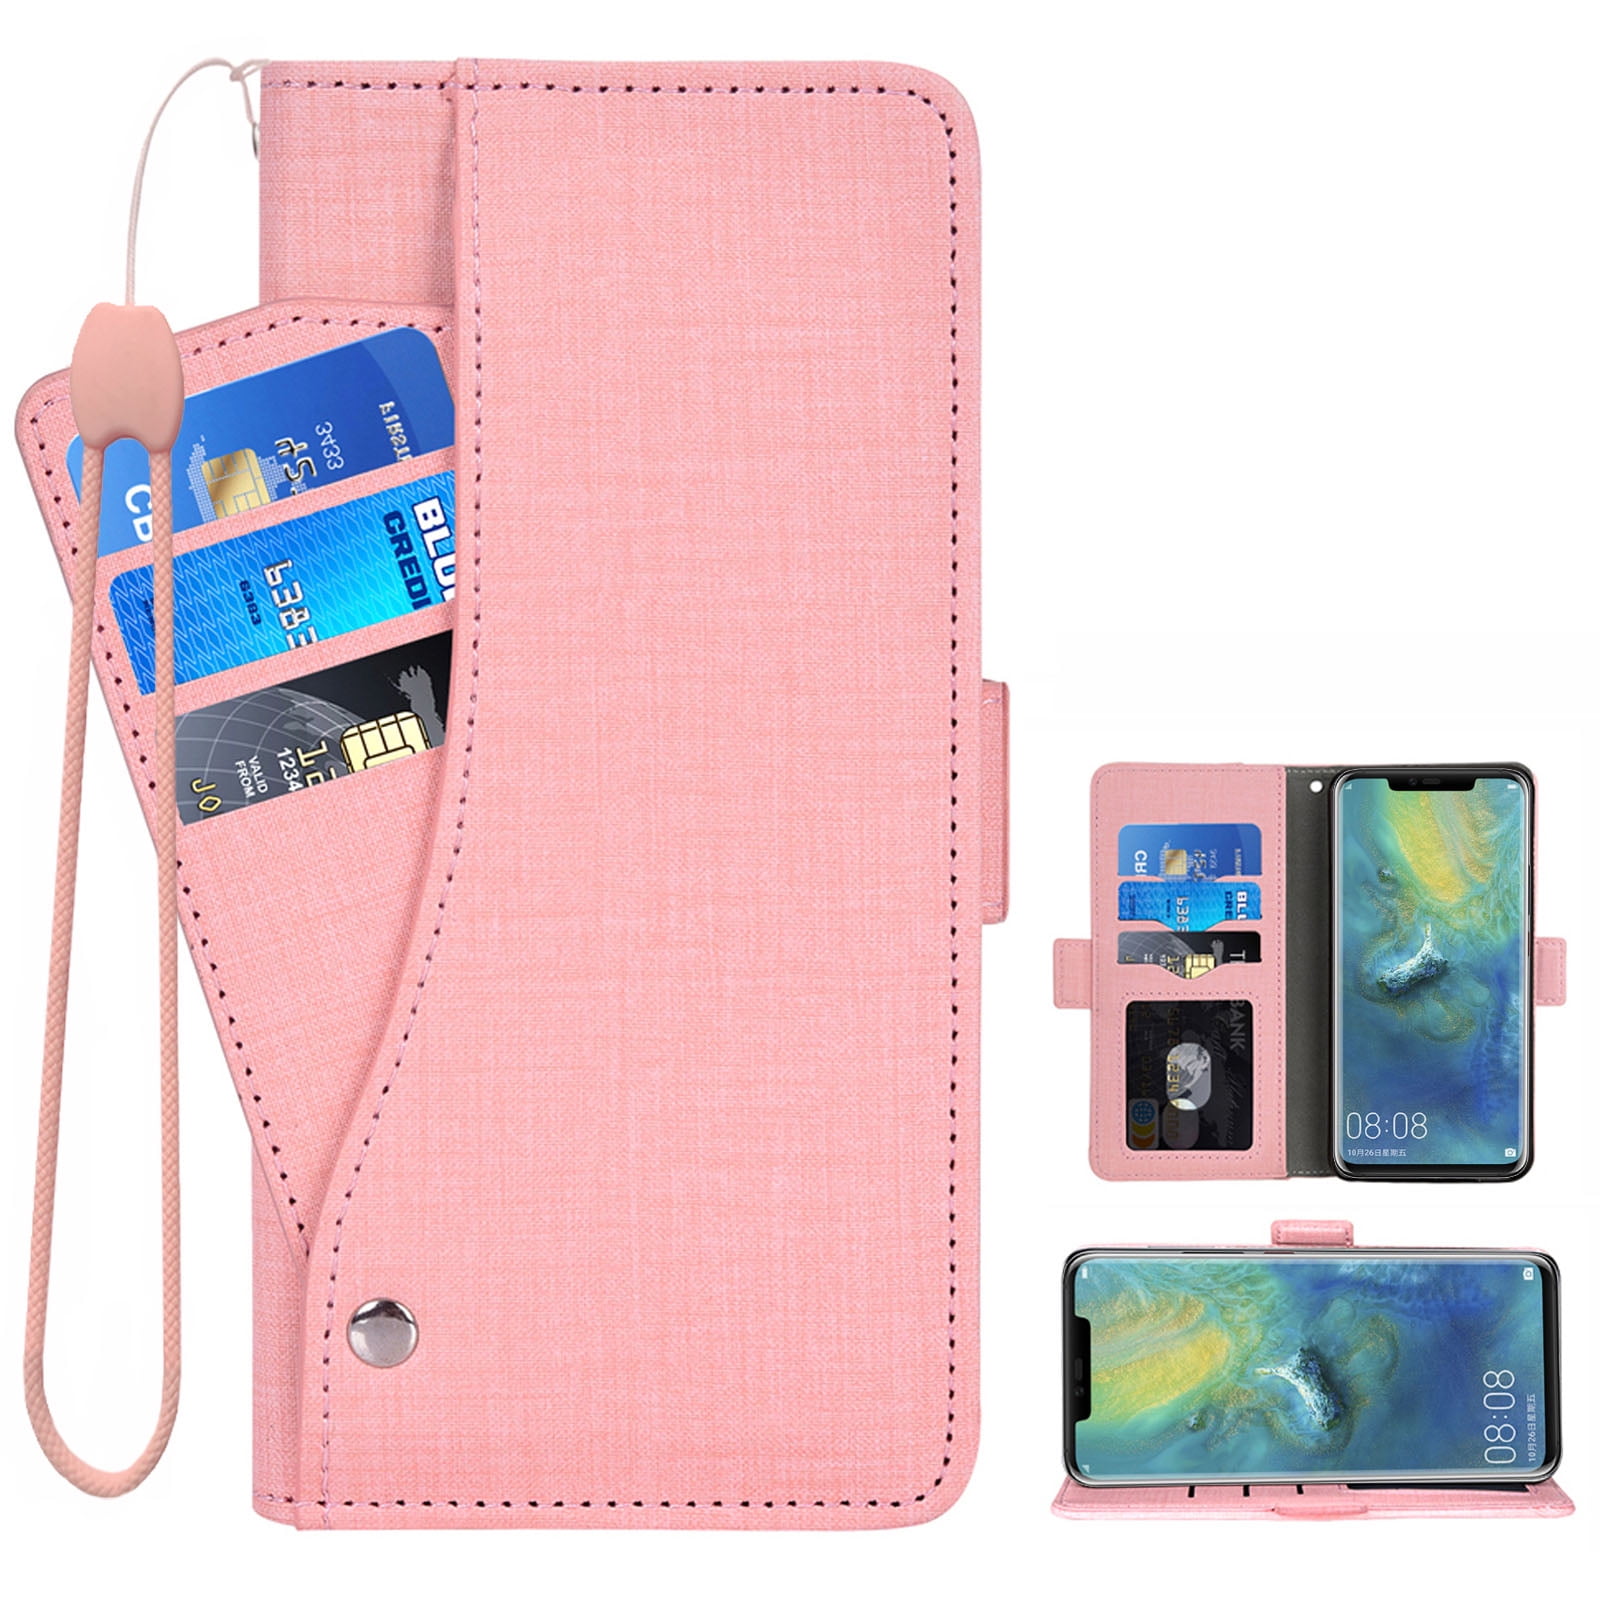 Cover for Huawei P20 PRO Leather Kickstand Wallet case Premium Business Card Holders with Free Waterproof-Bag Elegant Huawei P20 PRO Flip Case 